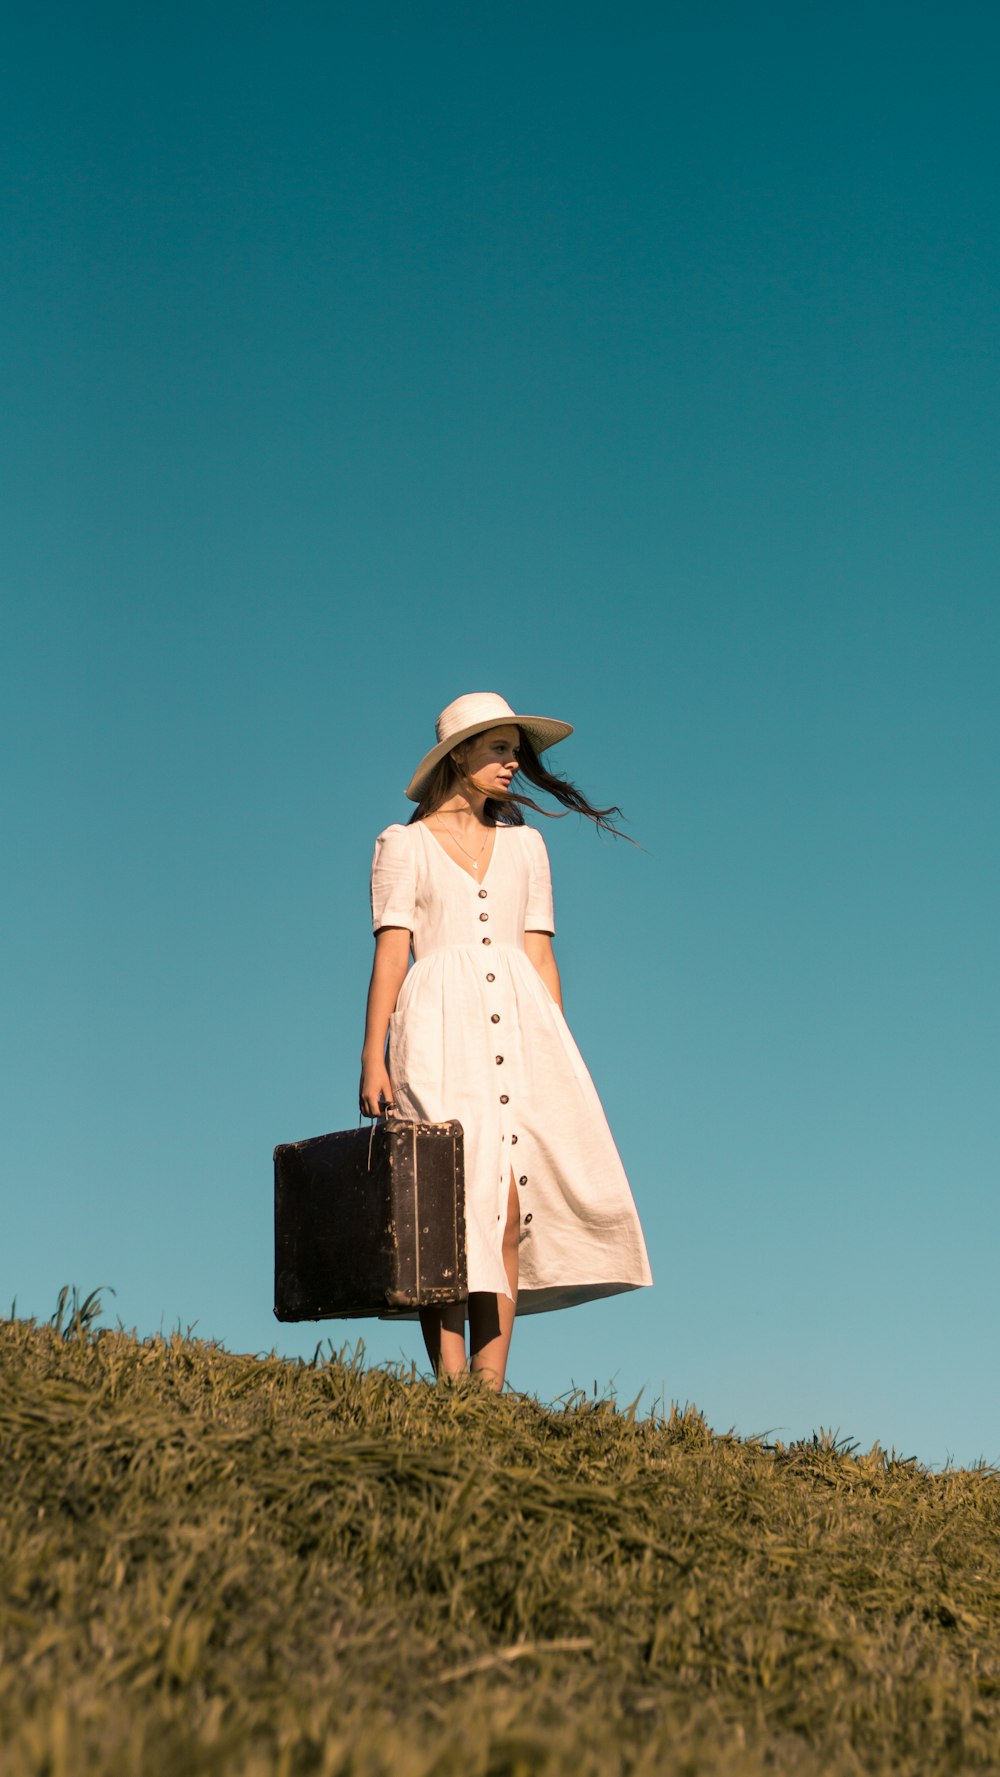 woman standing on green grass holding brown leather suitcase wearing white button-up dress